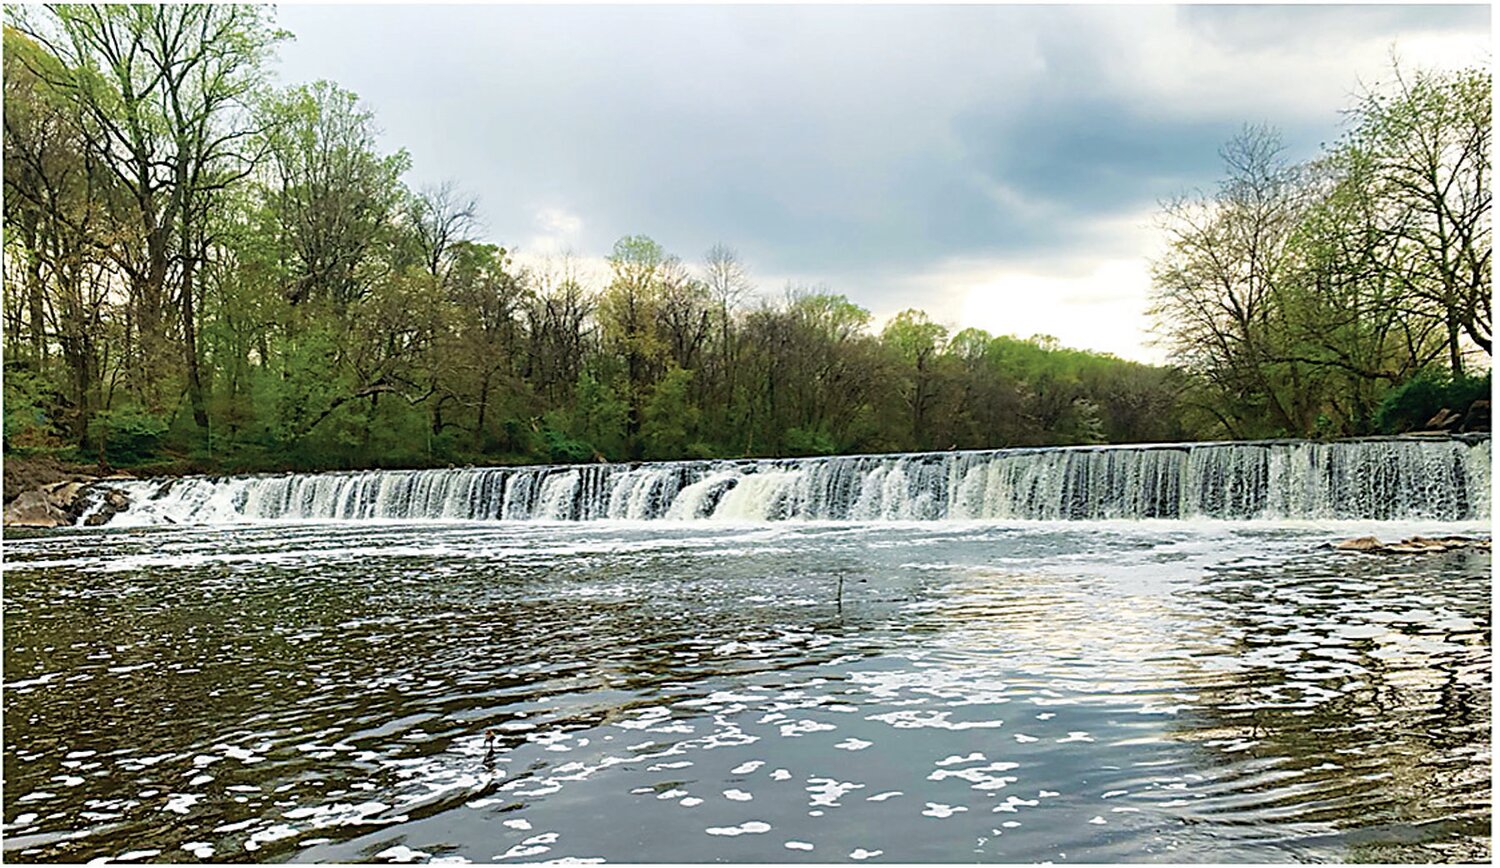 The first dam across the Neshaminy Creek created a steady source of power for early mills built on its banks.